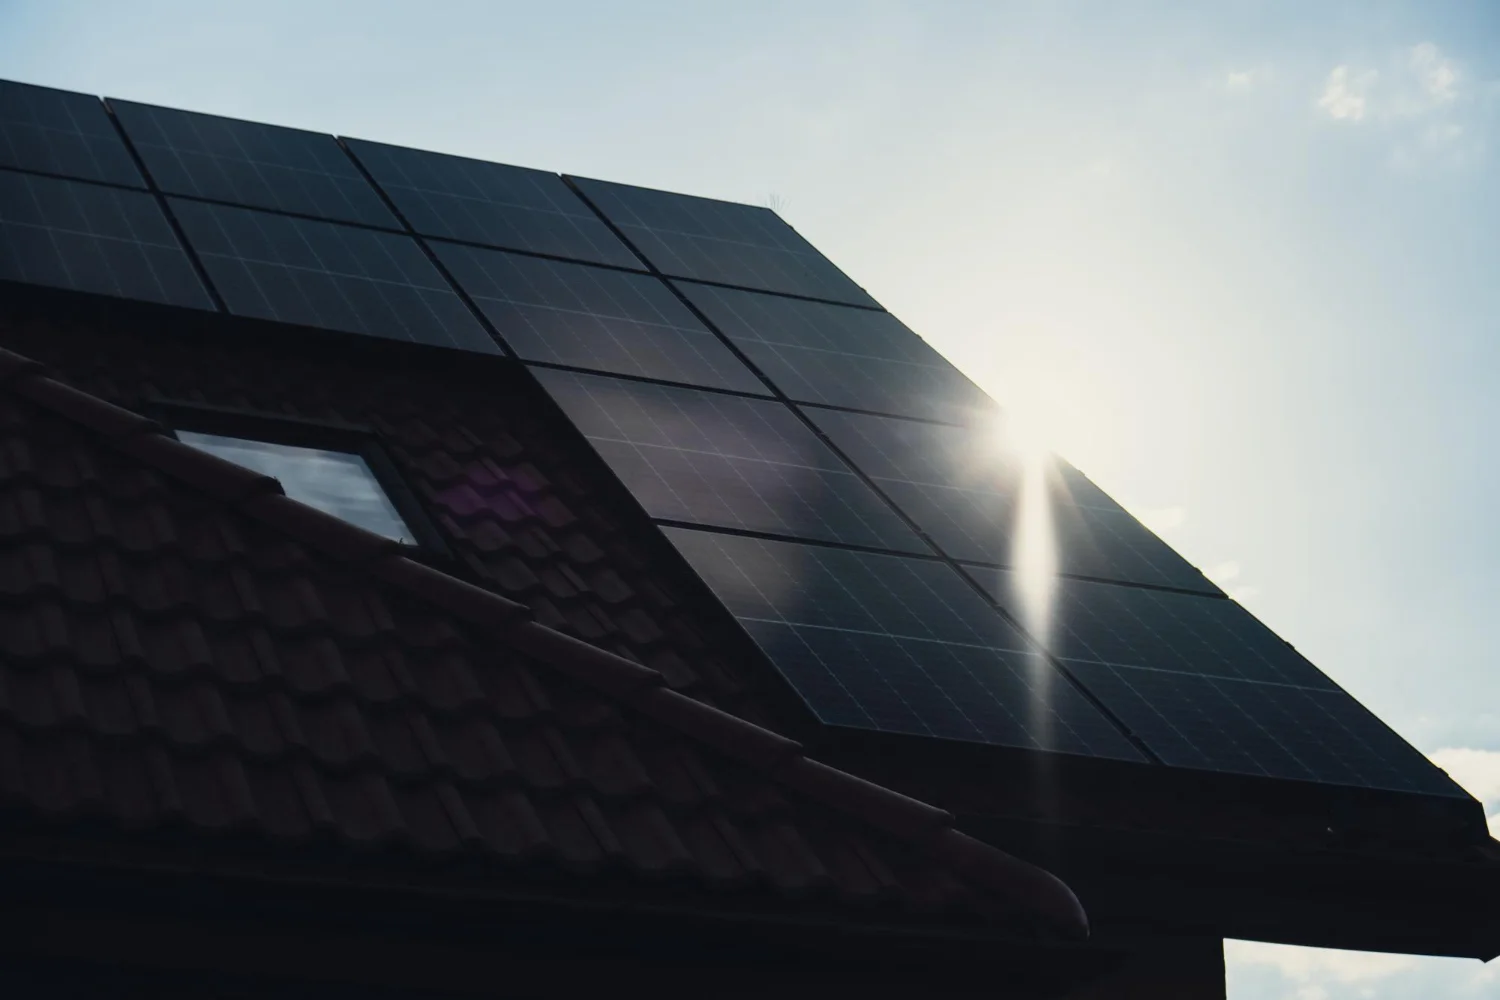 new-ecologic-house-with-solar-panels-alternative-conventional-energy-battery-is-charged-from-solar-cell-advertisement-green-energy-sustainable-life-renewable-copy